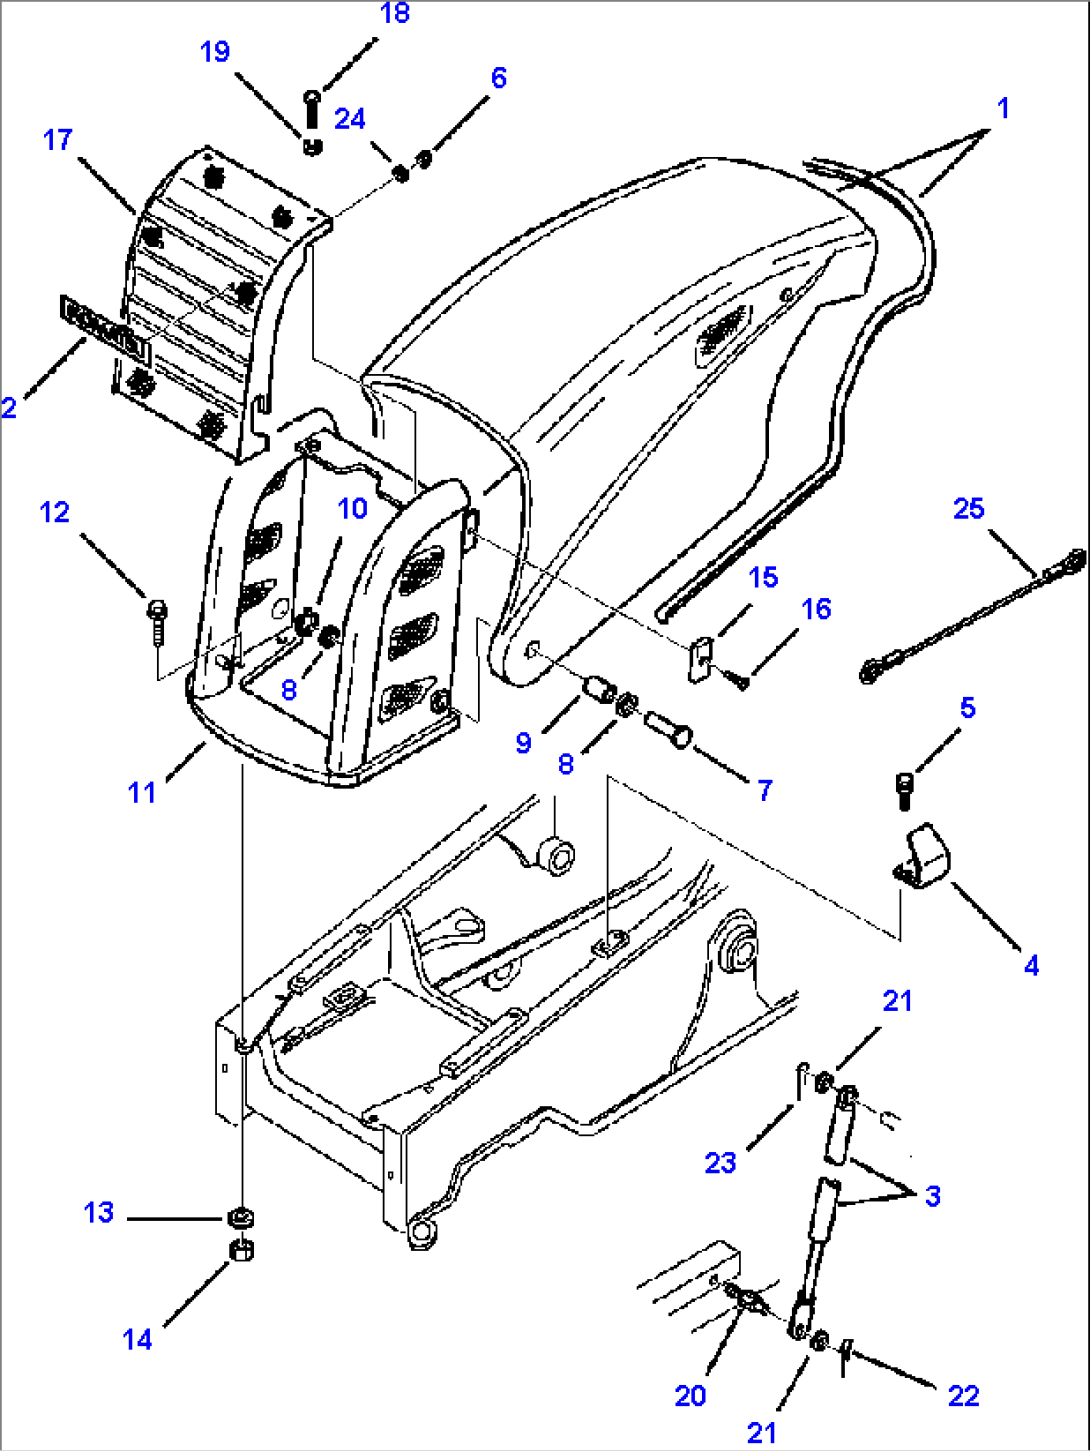 FIG. M5000-01A0 HOOD AND FRONT GRILLE